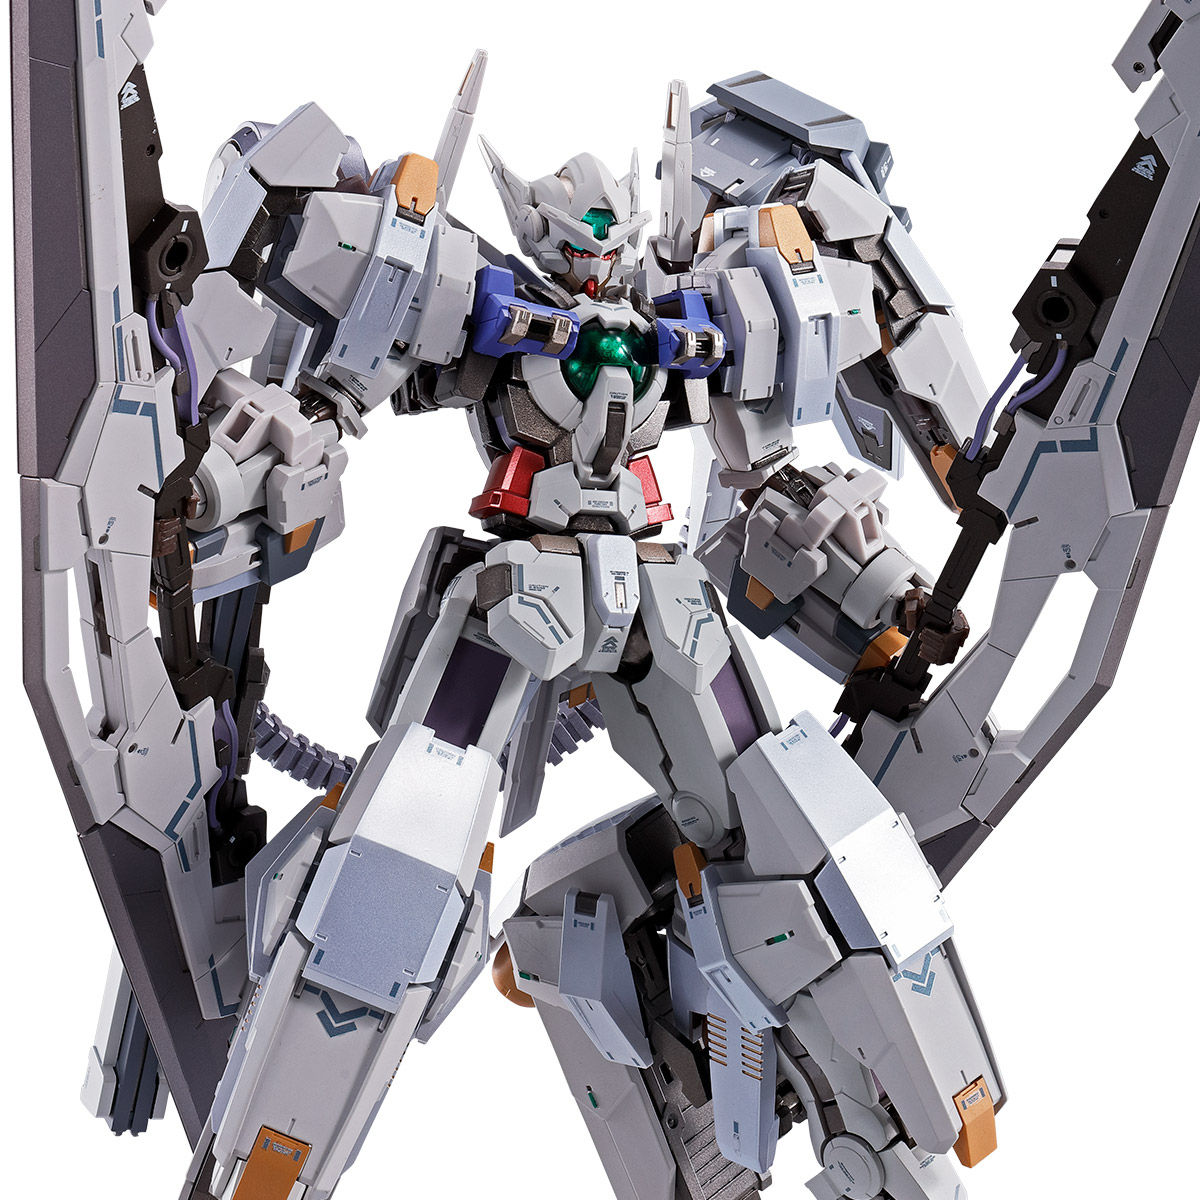 P-Bandai: METAL BUILD Gundam Astraea High Mobility Test Type Equipment Parts - PARTS ONLY [End of April 2020]